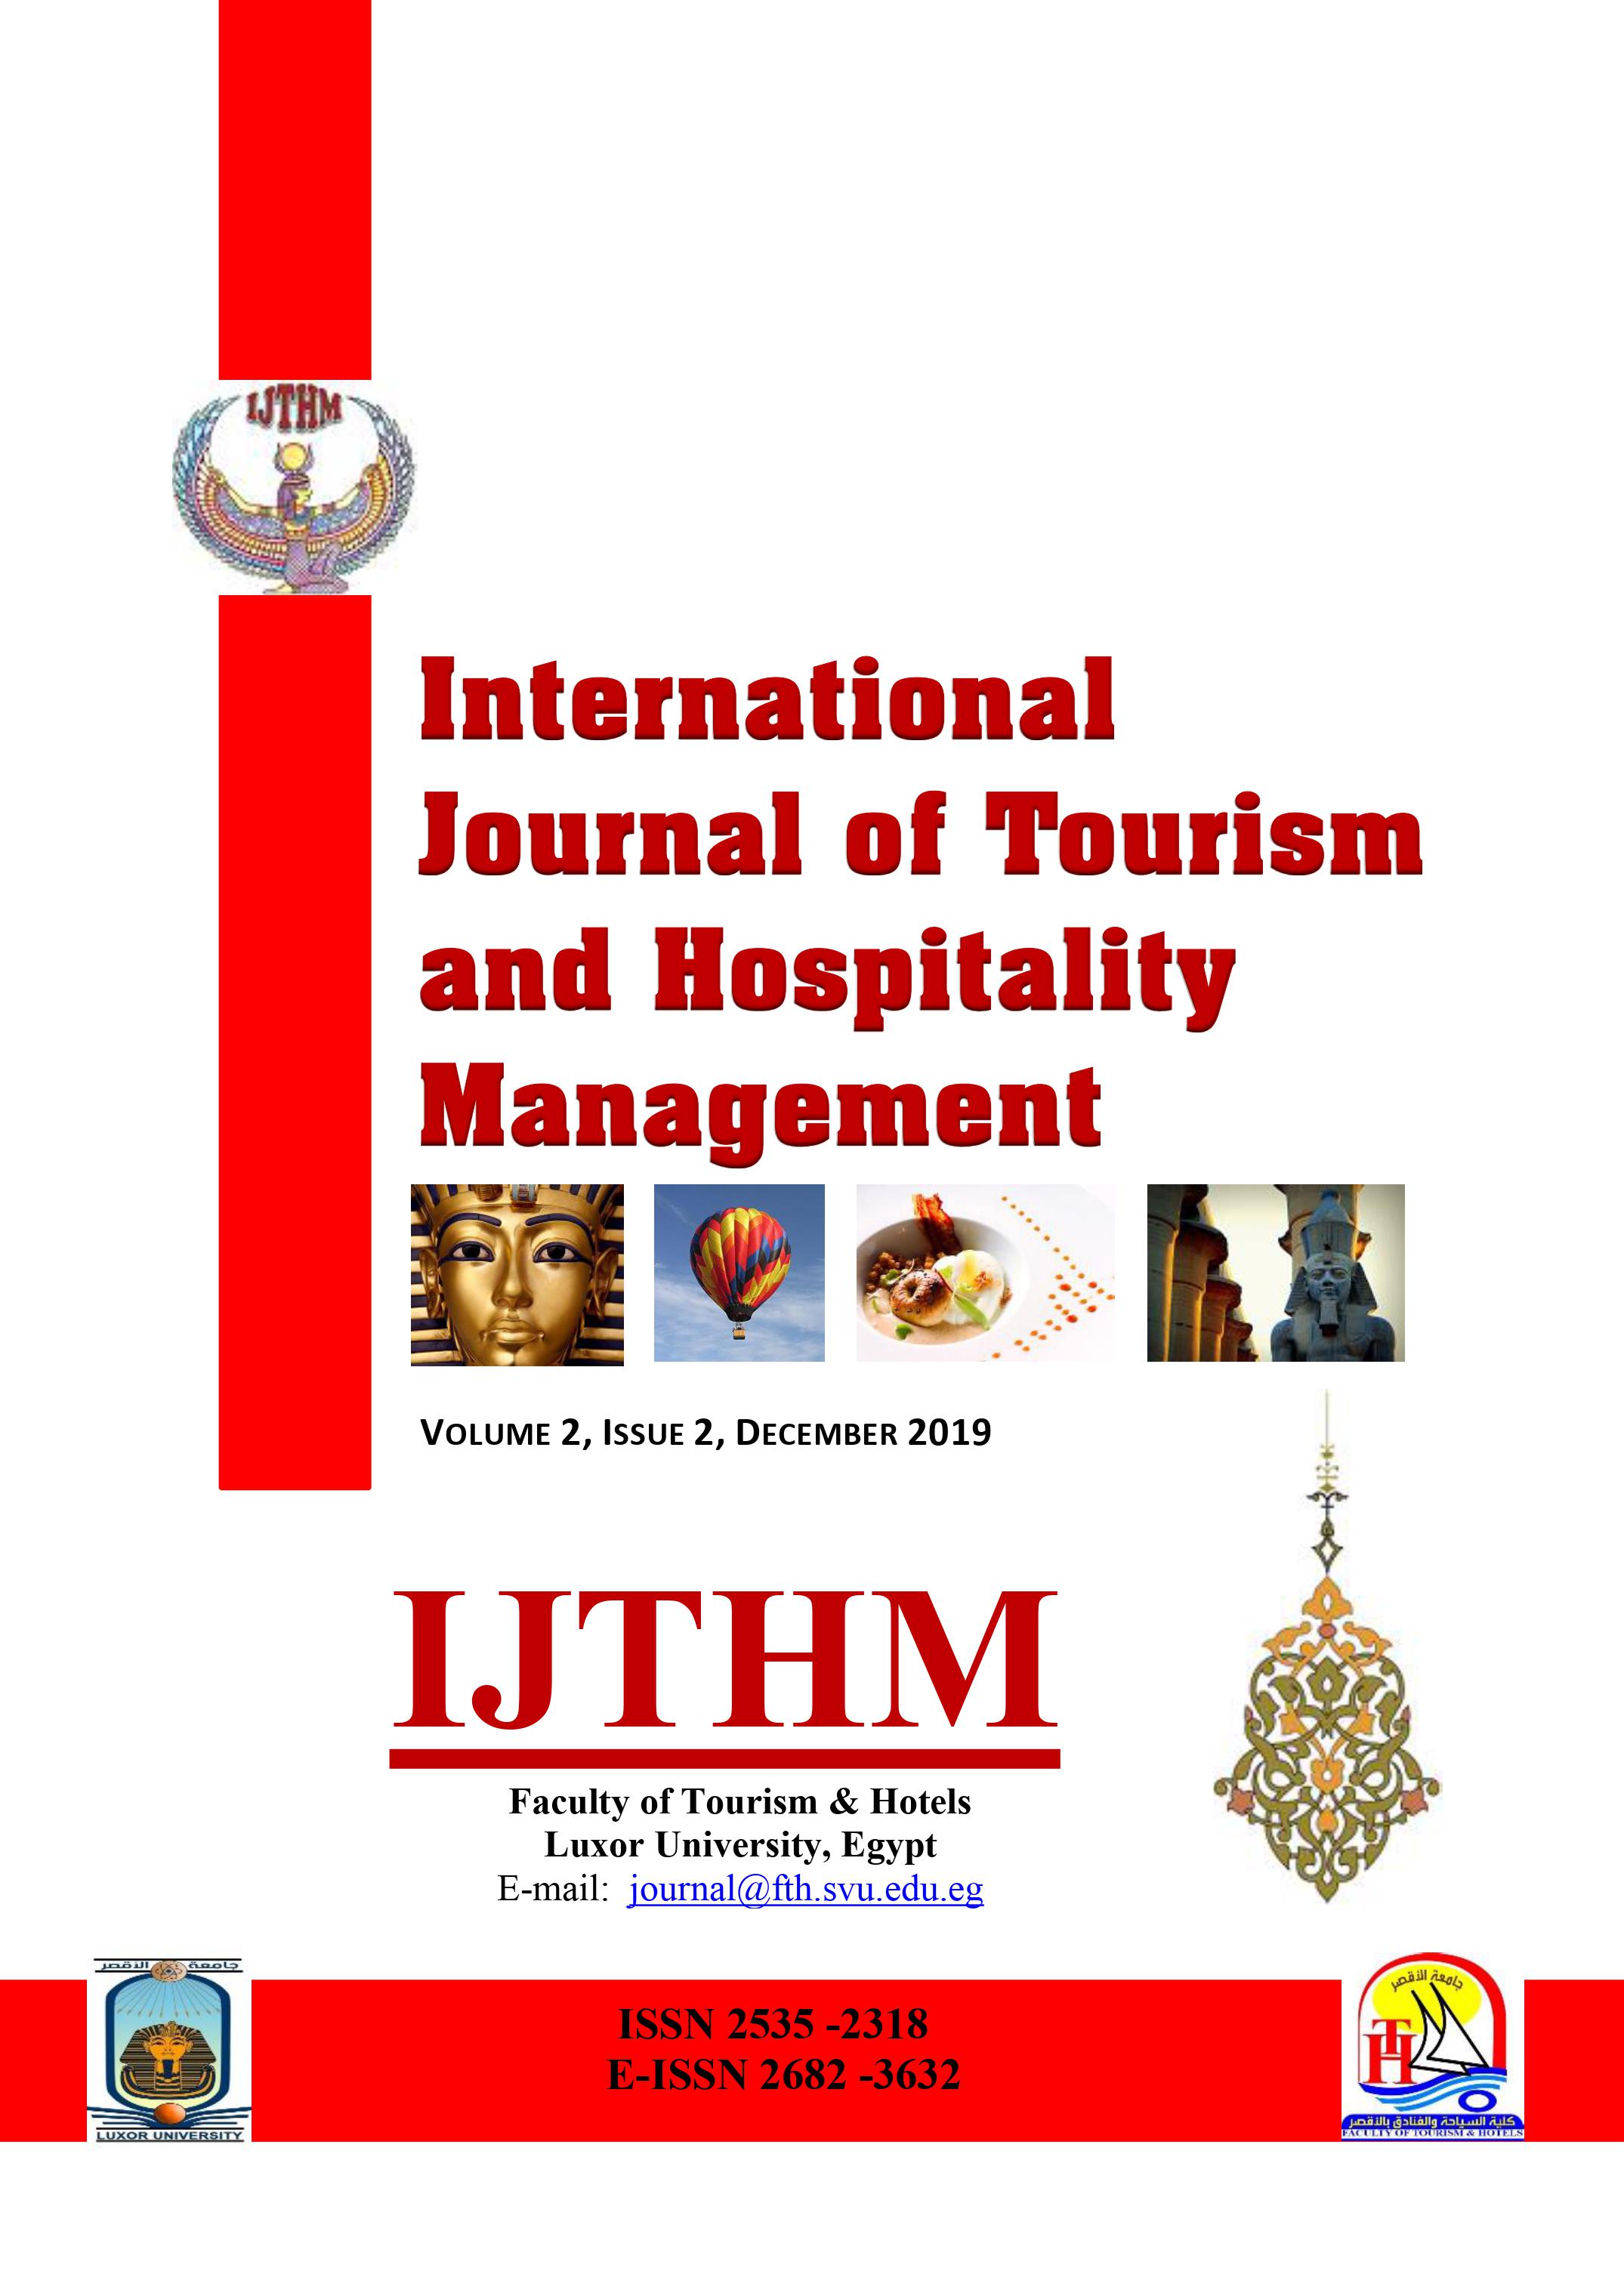 International Journal of Tourism and Hospitality Management